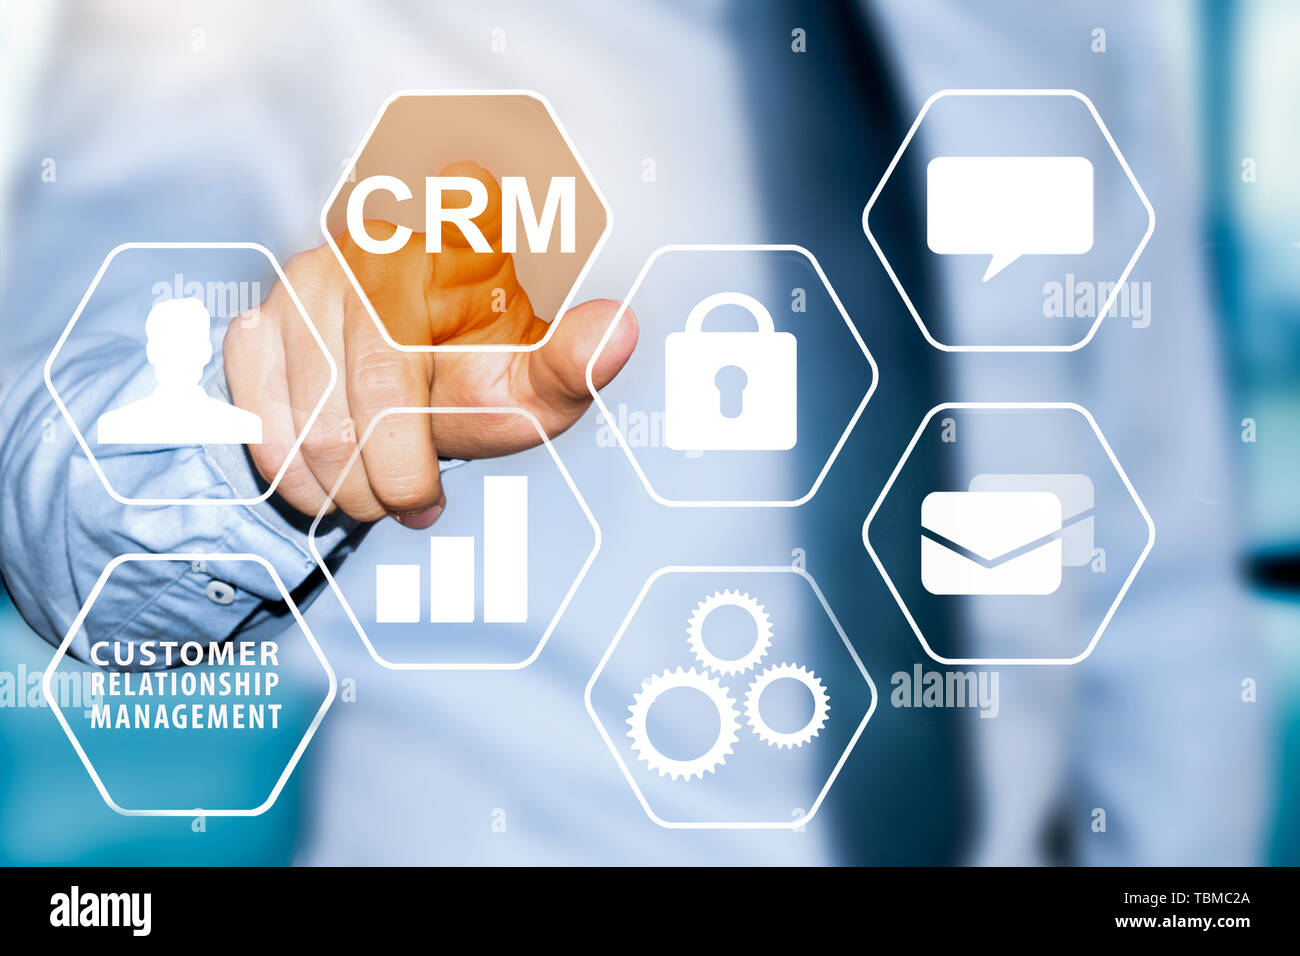 CRM Customer relationship management concept Stock Photo